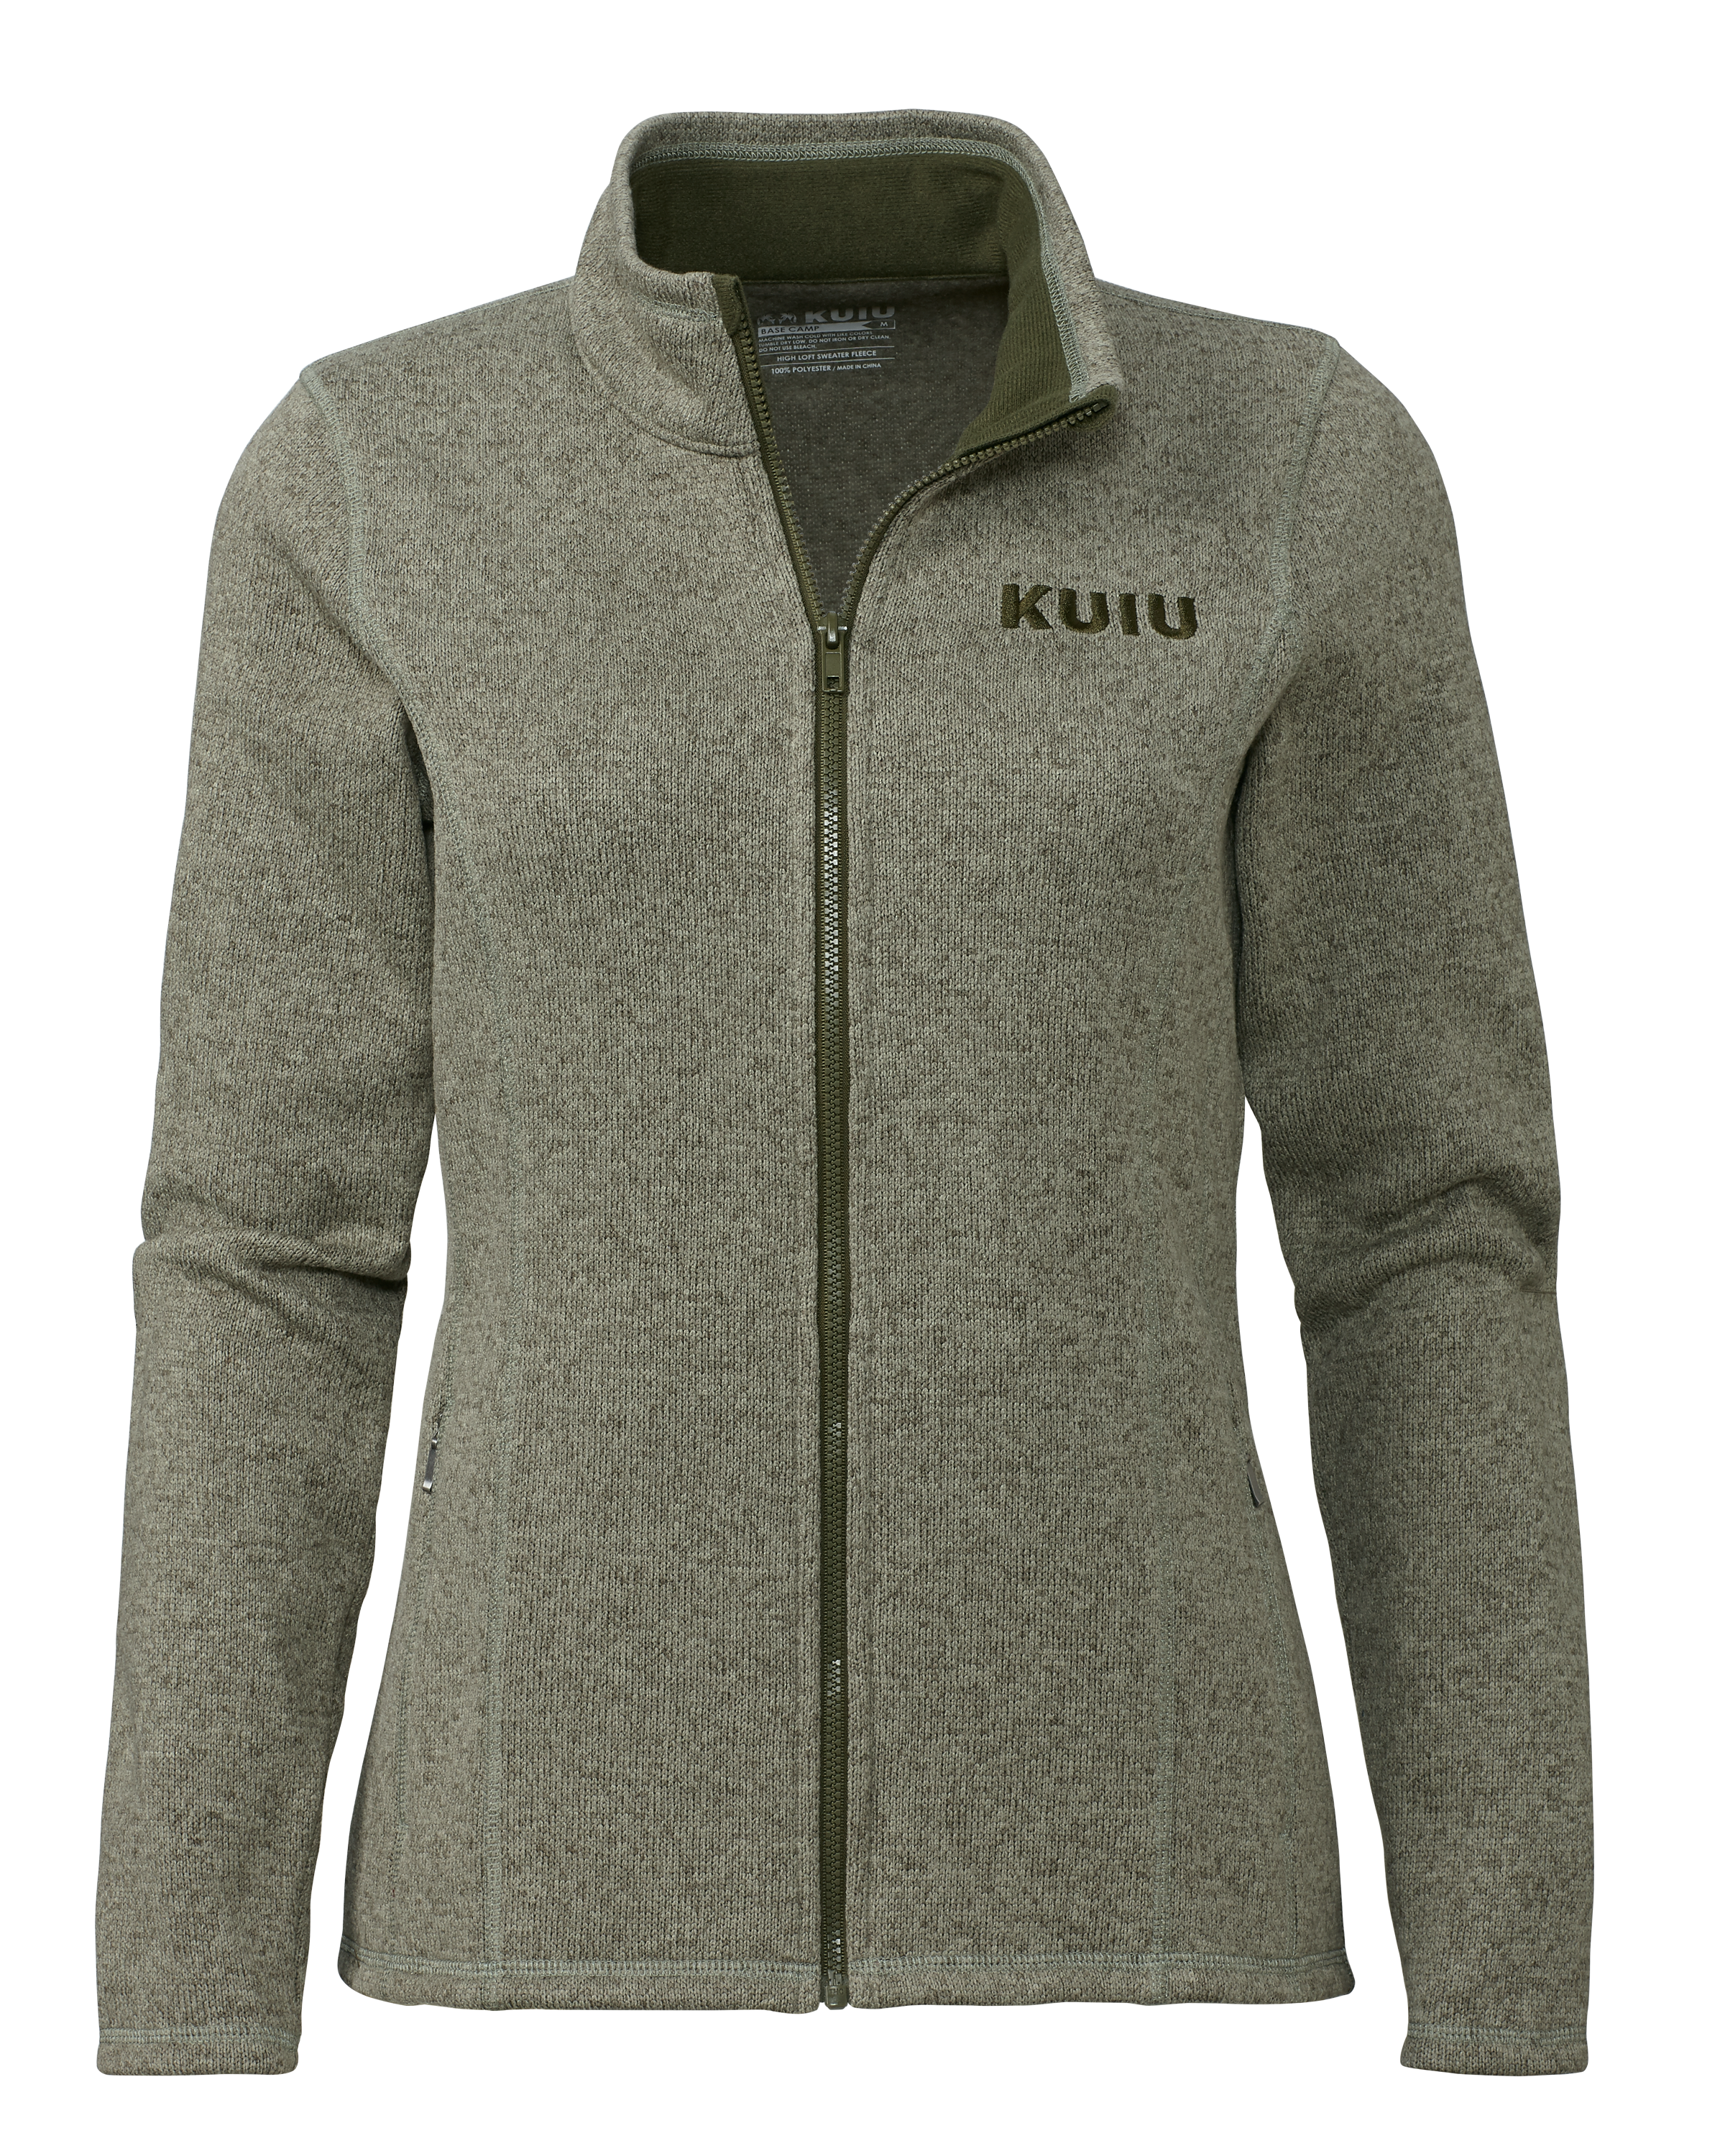 KUIU Outlet Women's Base Camp Sweater in Heather Olive | Size XS